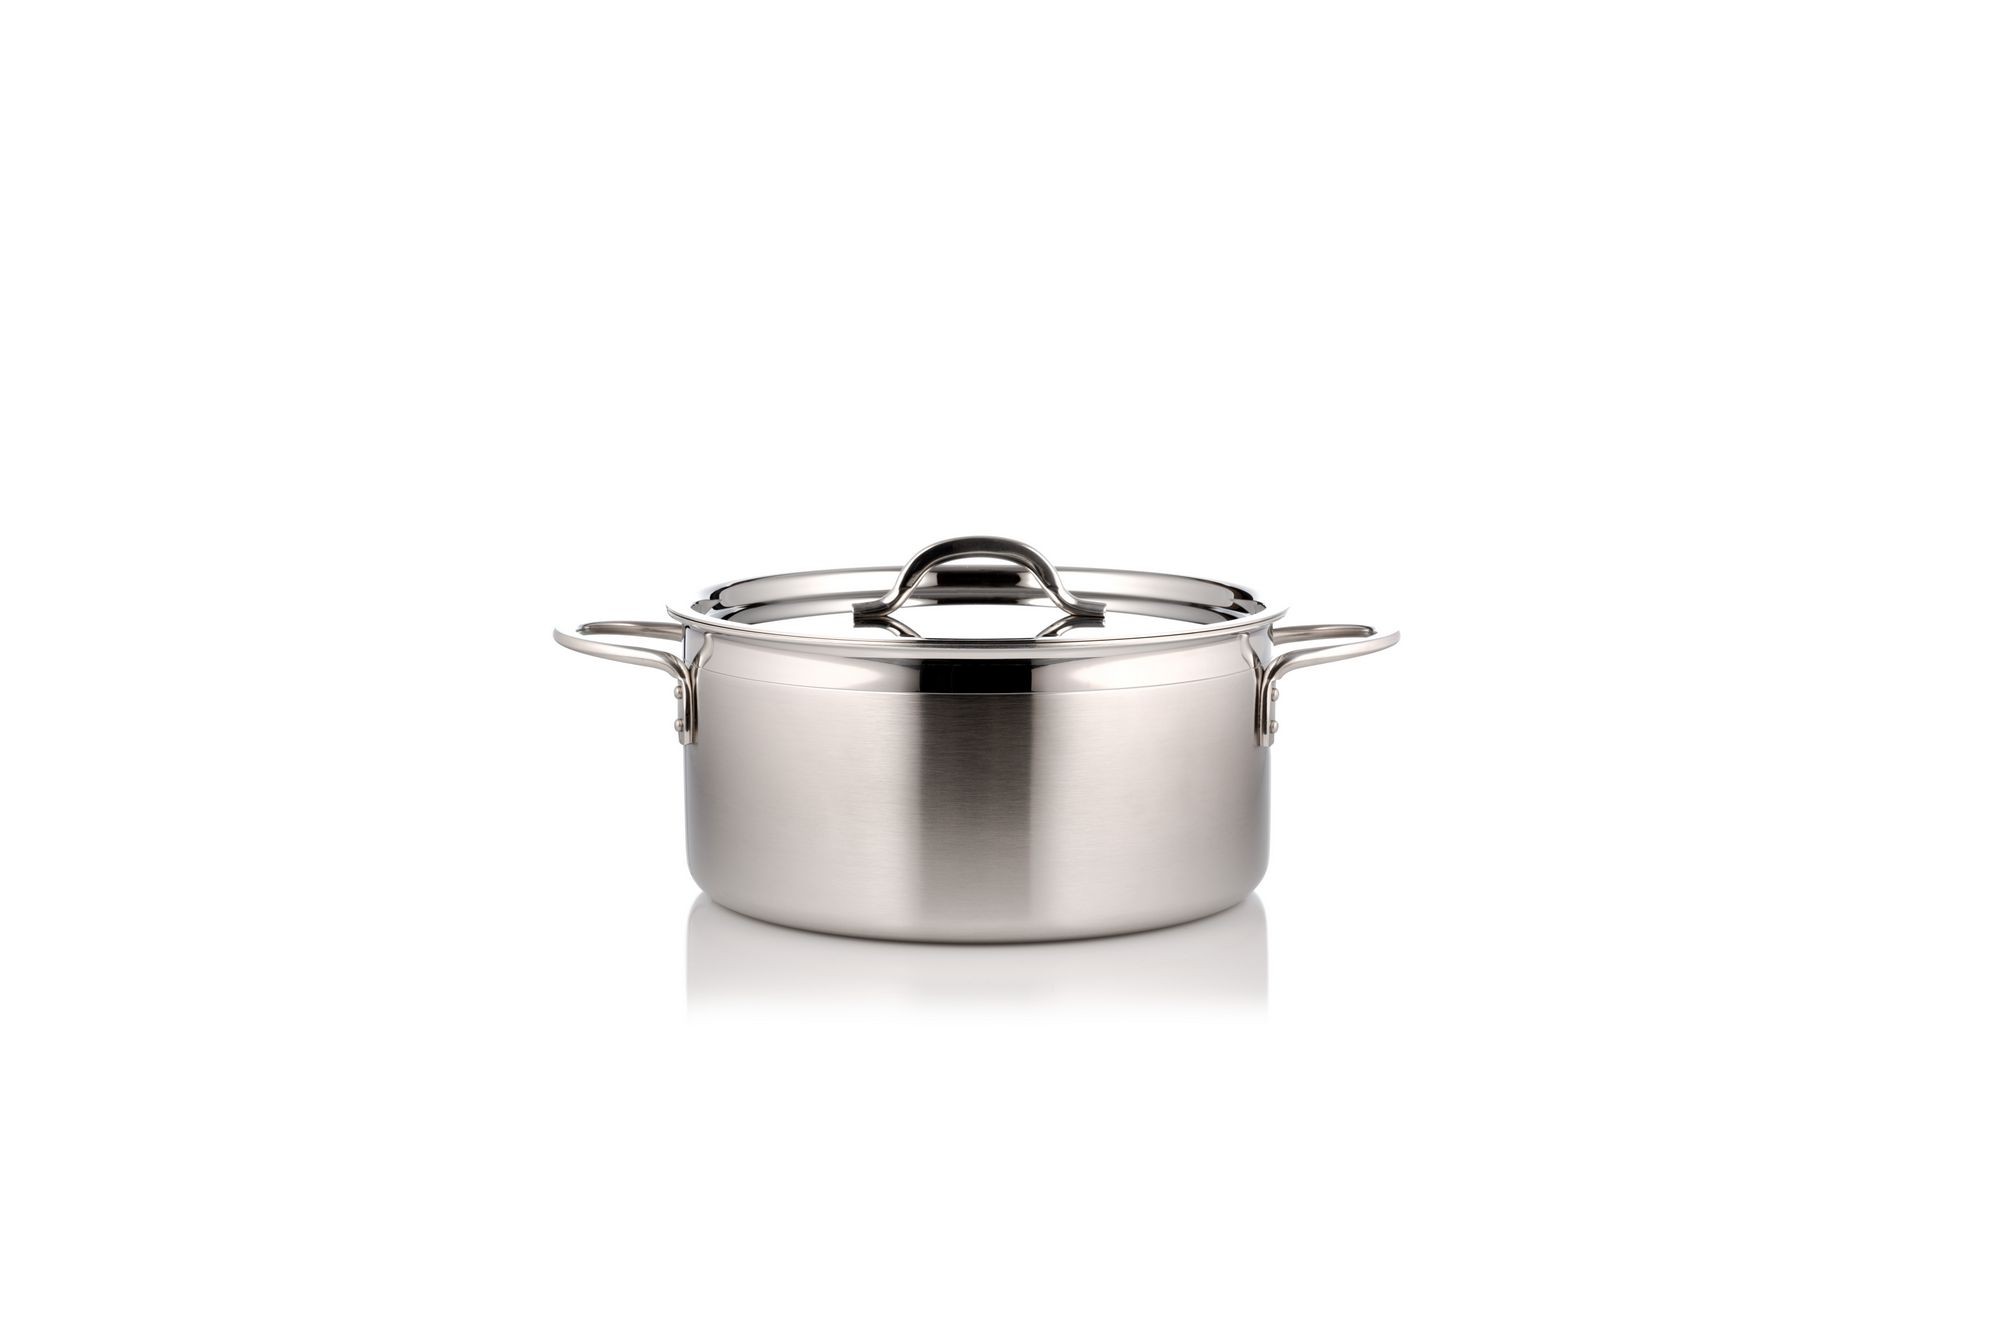 Bon Chef 60301-2ToneSS Country French Two Tone Stainless Steel Pot with Cover, 3 Qt. 9 oz.